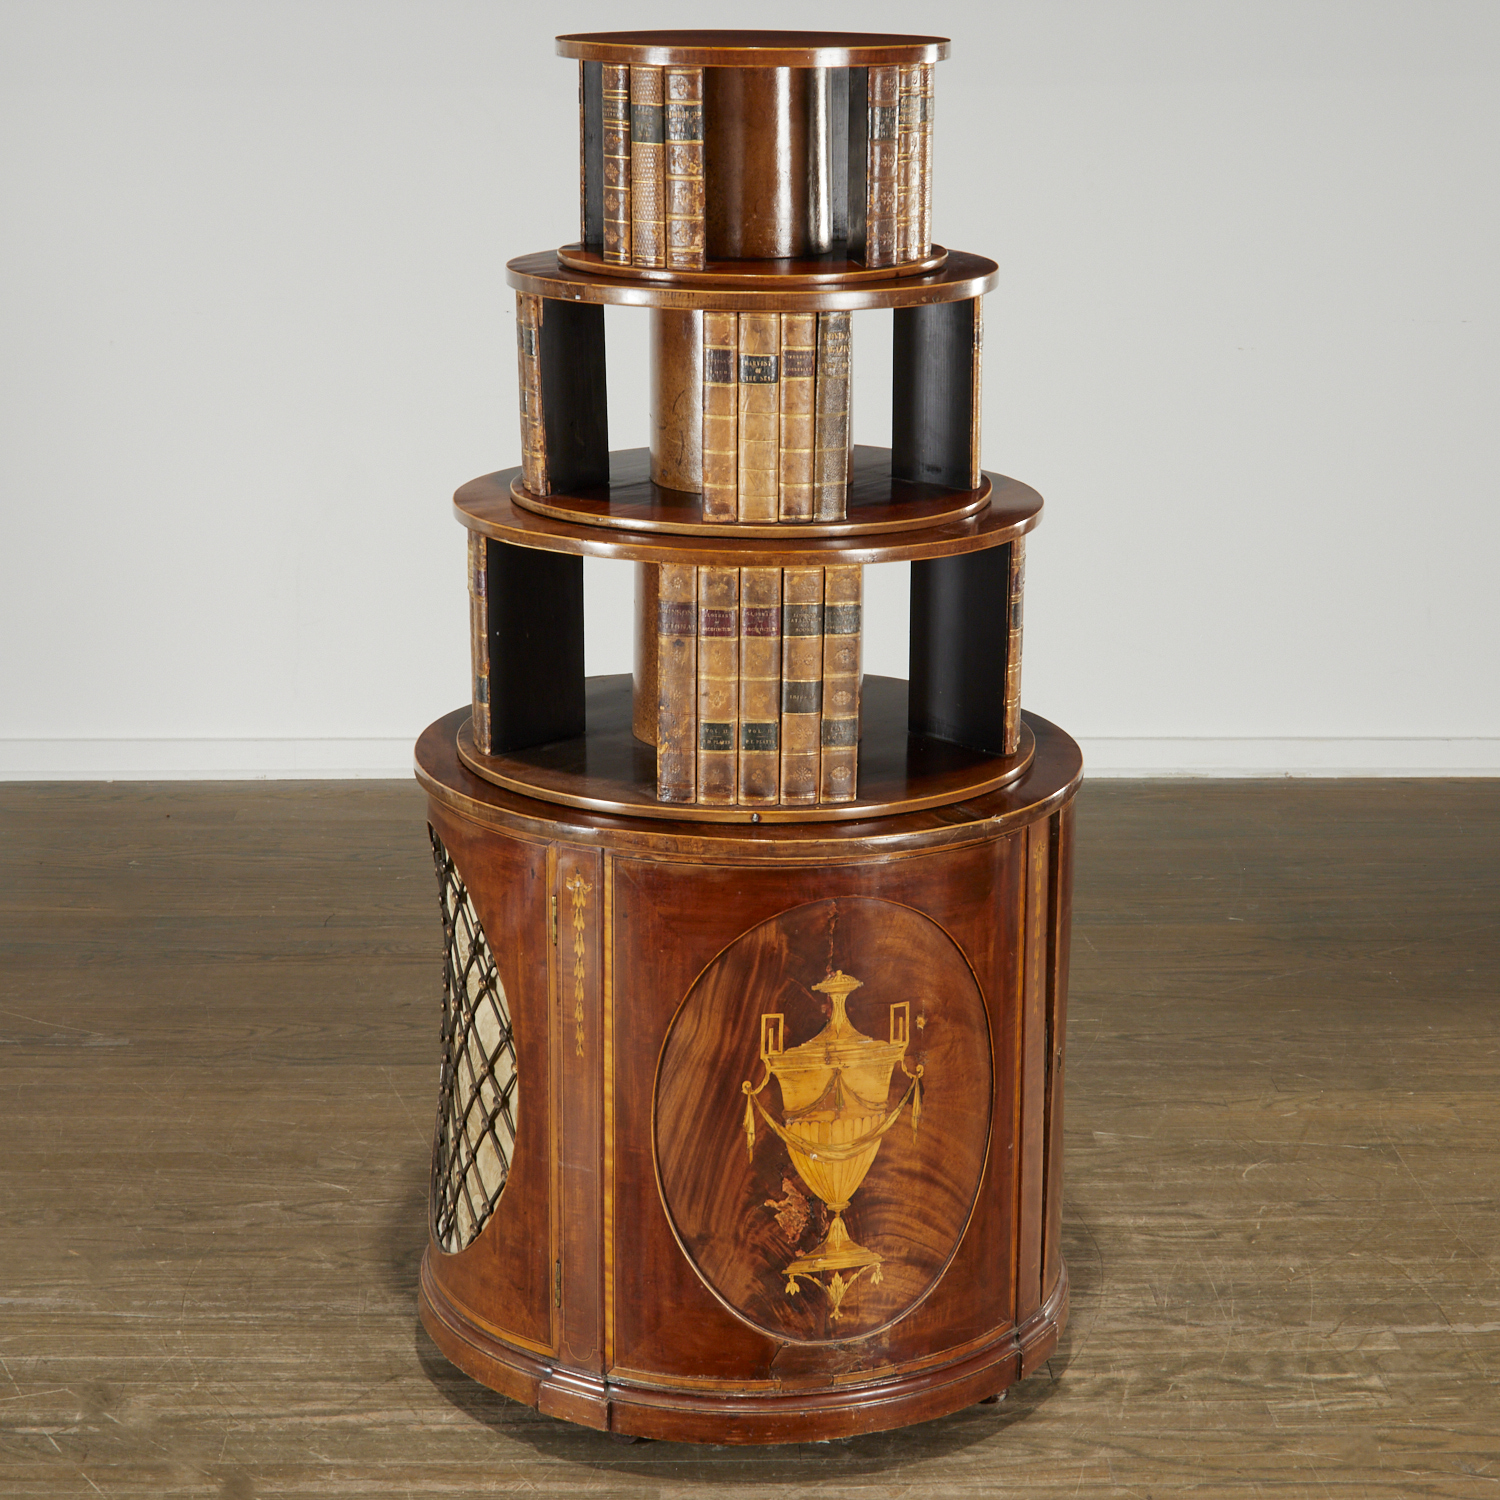 GEORGE III STACKED CYLINDER REVOLVING 3c264e